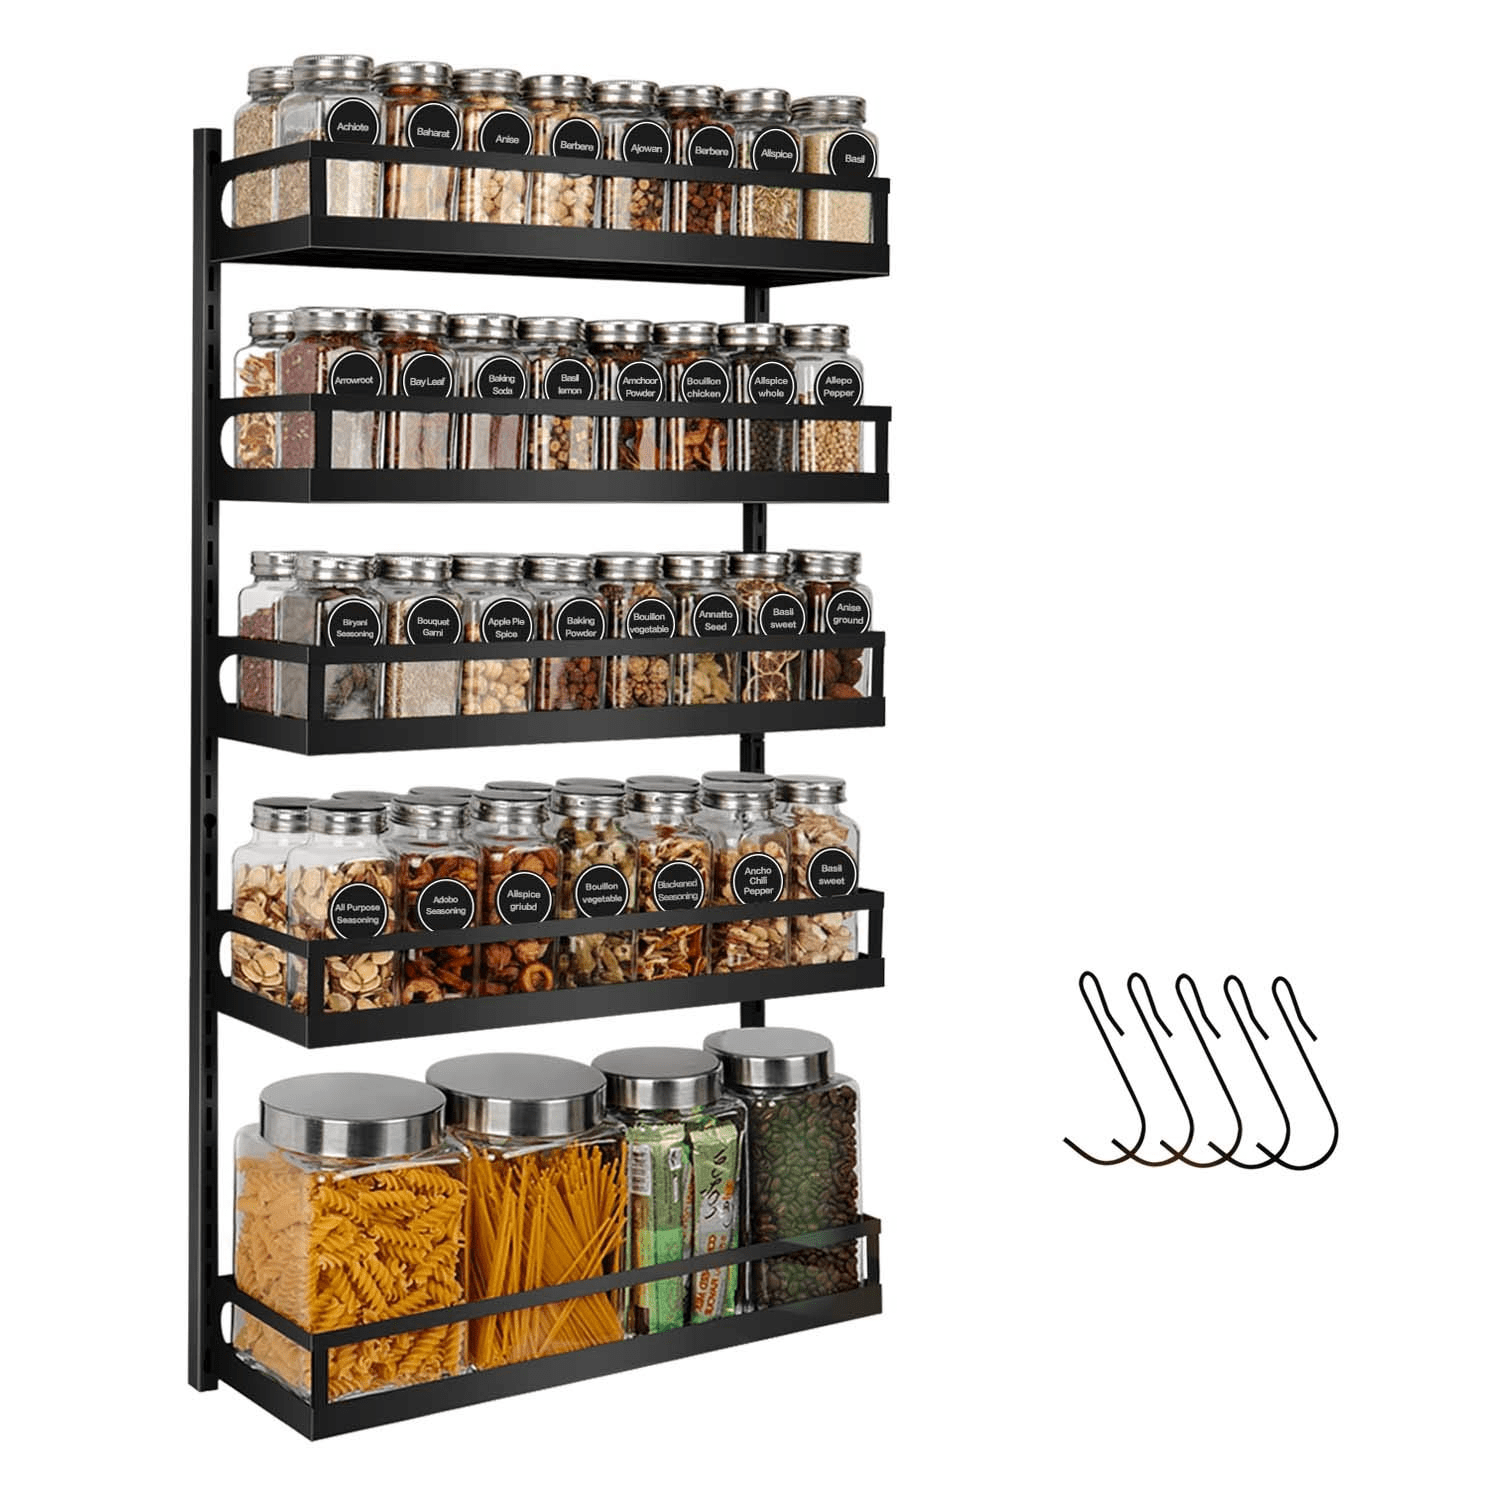 VAEHOLD Acrylic Spice Rack, 5 Tier Clear Spice Rack Organizer for Cabinet, Vertical Spice Rack Kitchen Organizer Shelf for Countertop (5 Tier 12‘’L)